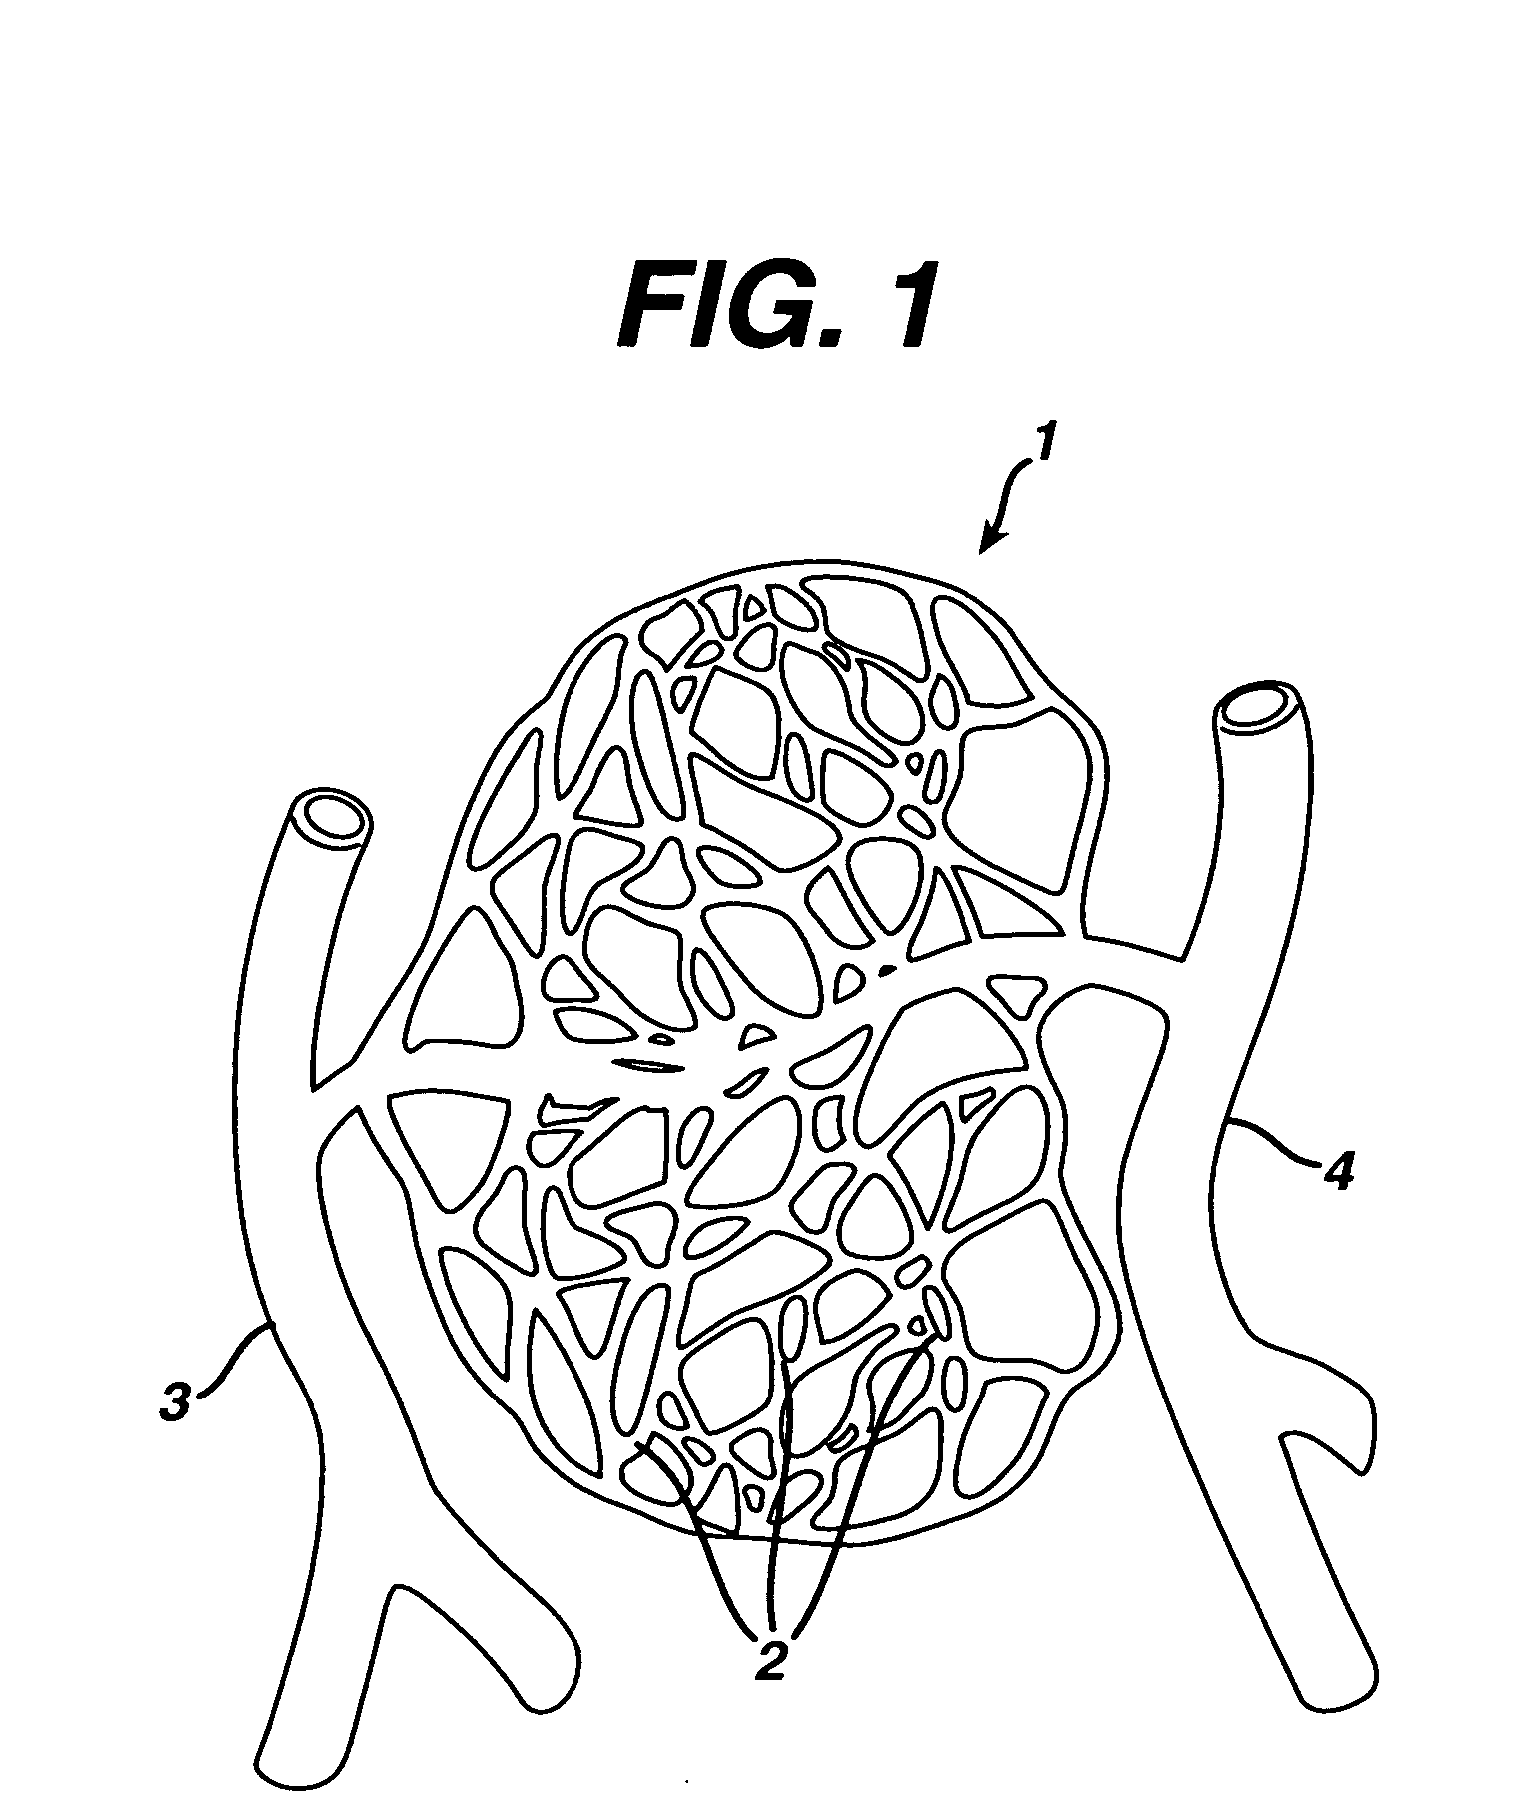 Systems and methods for occluding a blood vessel